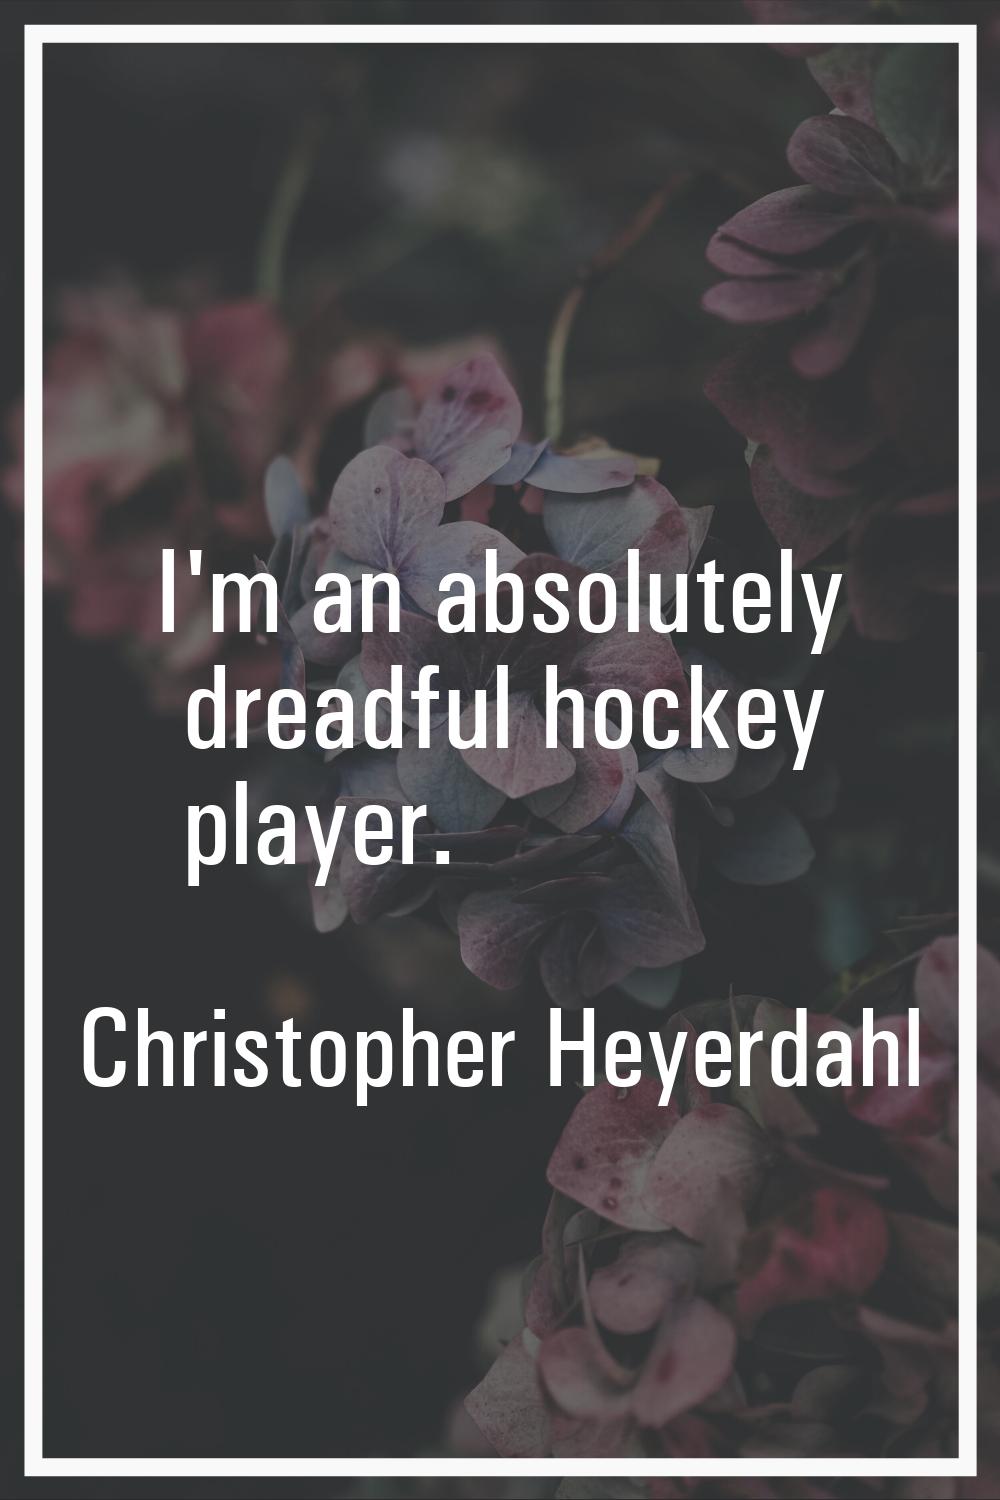 I'm an absolutely dreadful hockey player.